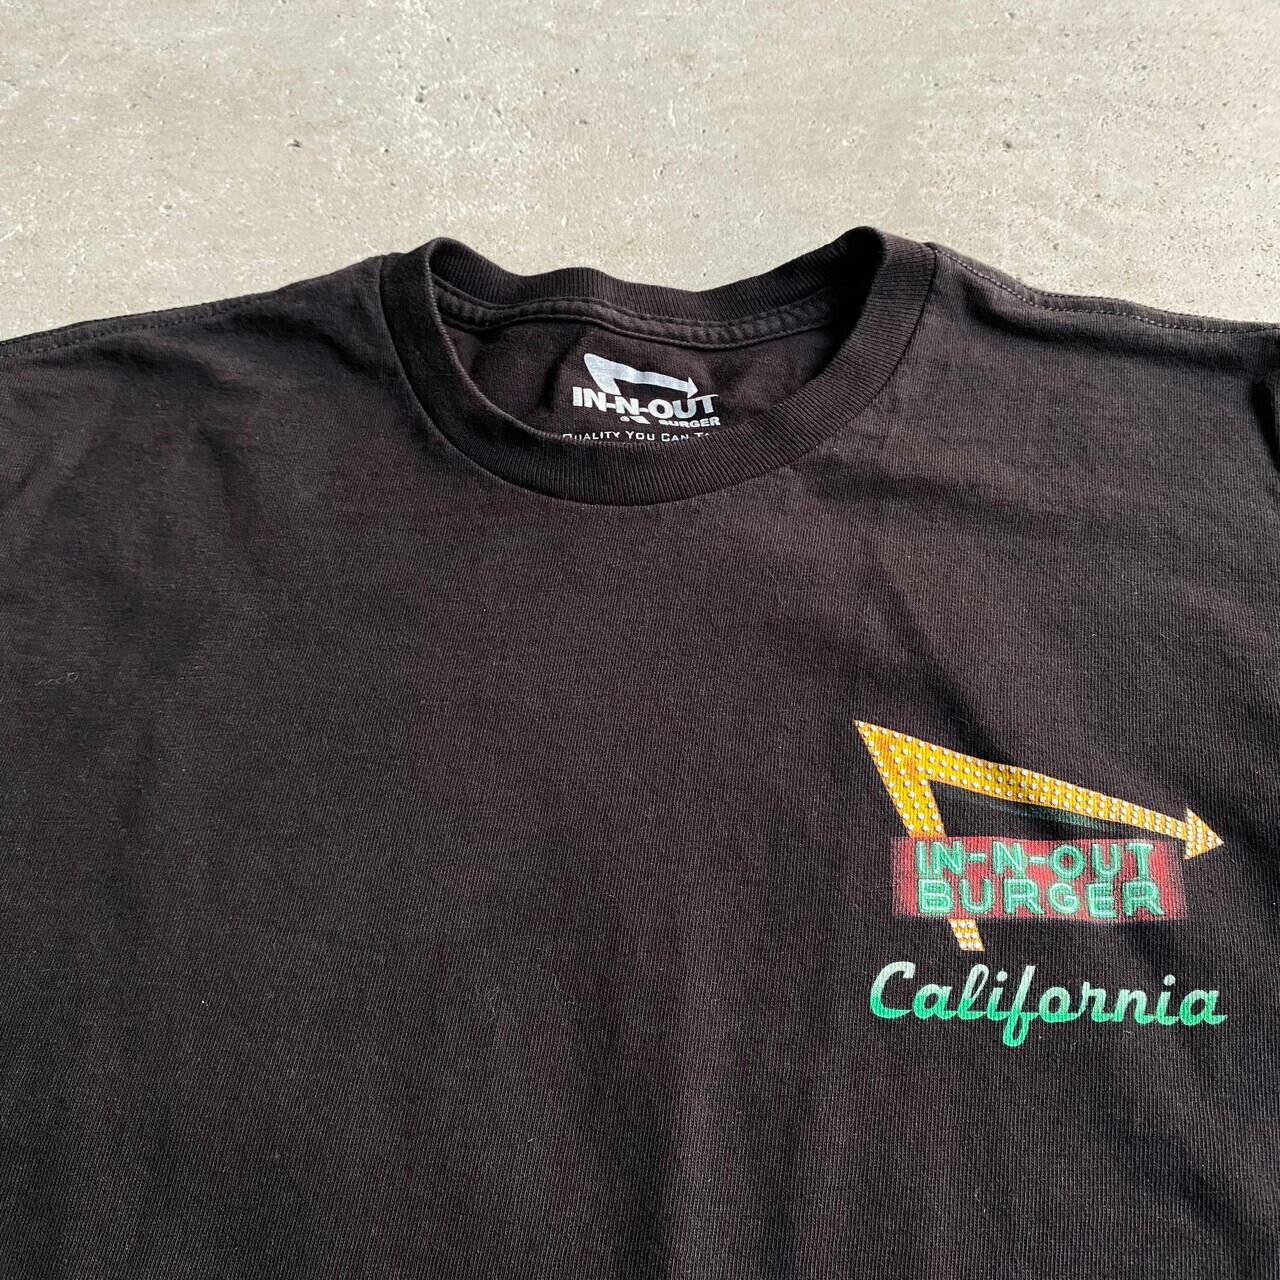 IN-N-OUT BURGER 70 ANNIVERSARY 両面プリント アドバタイジングTシャツ メンズXS /eaa334270